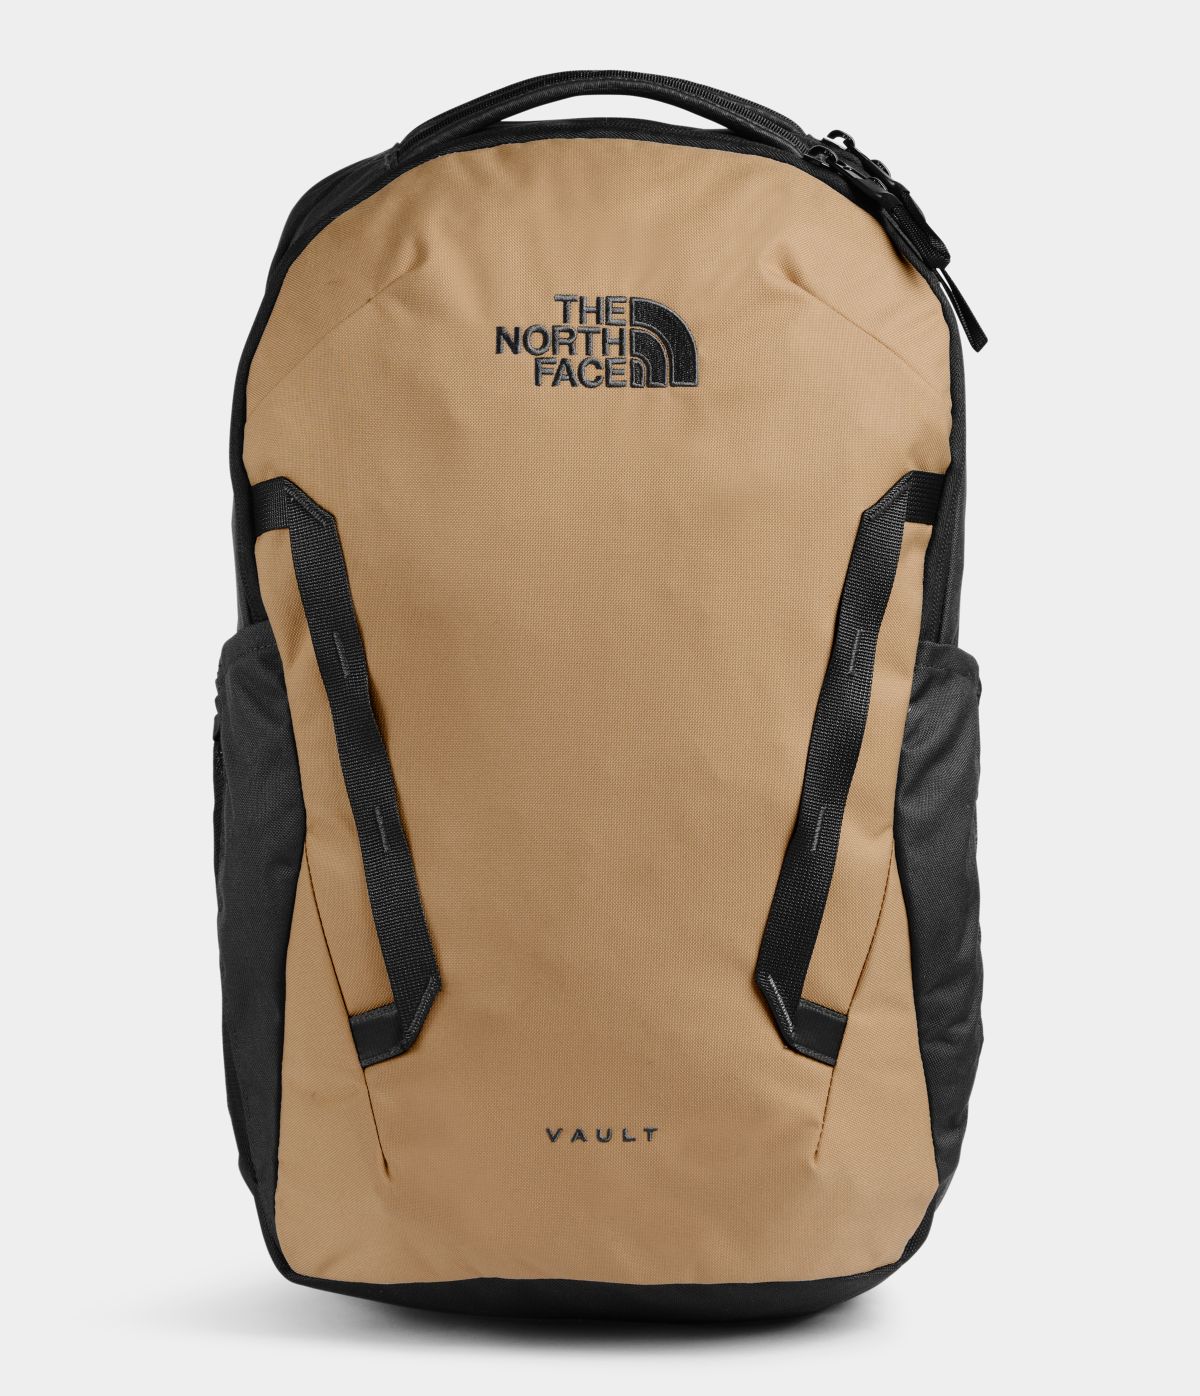 Unisex The North Face Vault Backpack in Moab Khaki/Asphalt Grey from front view